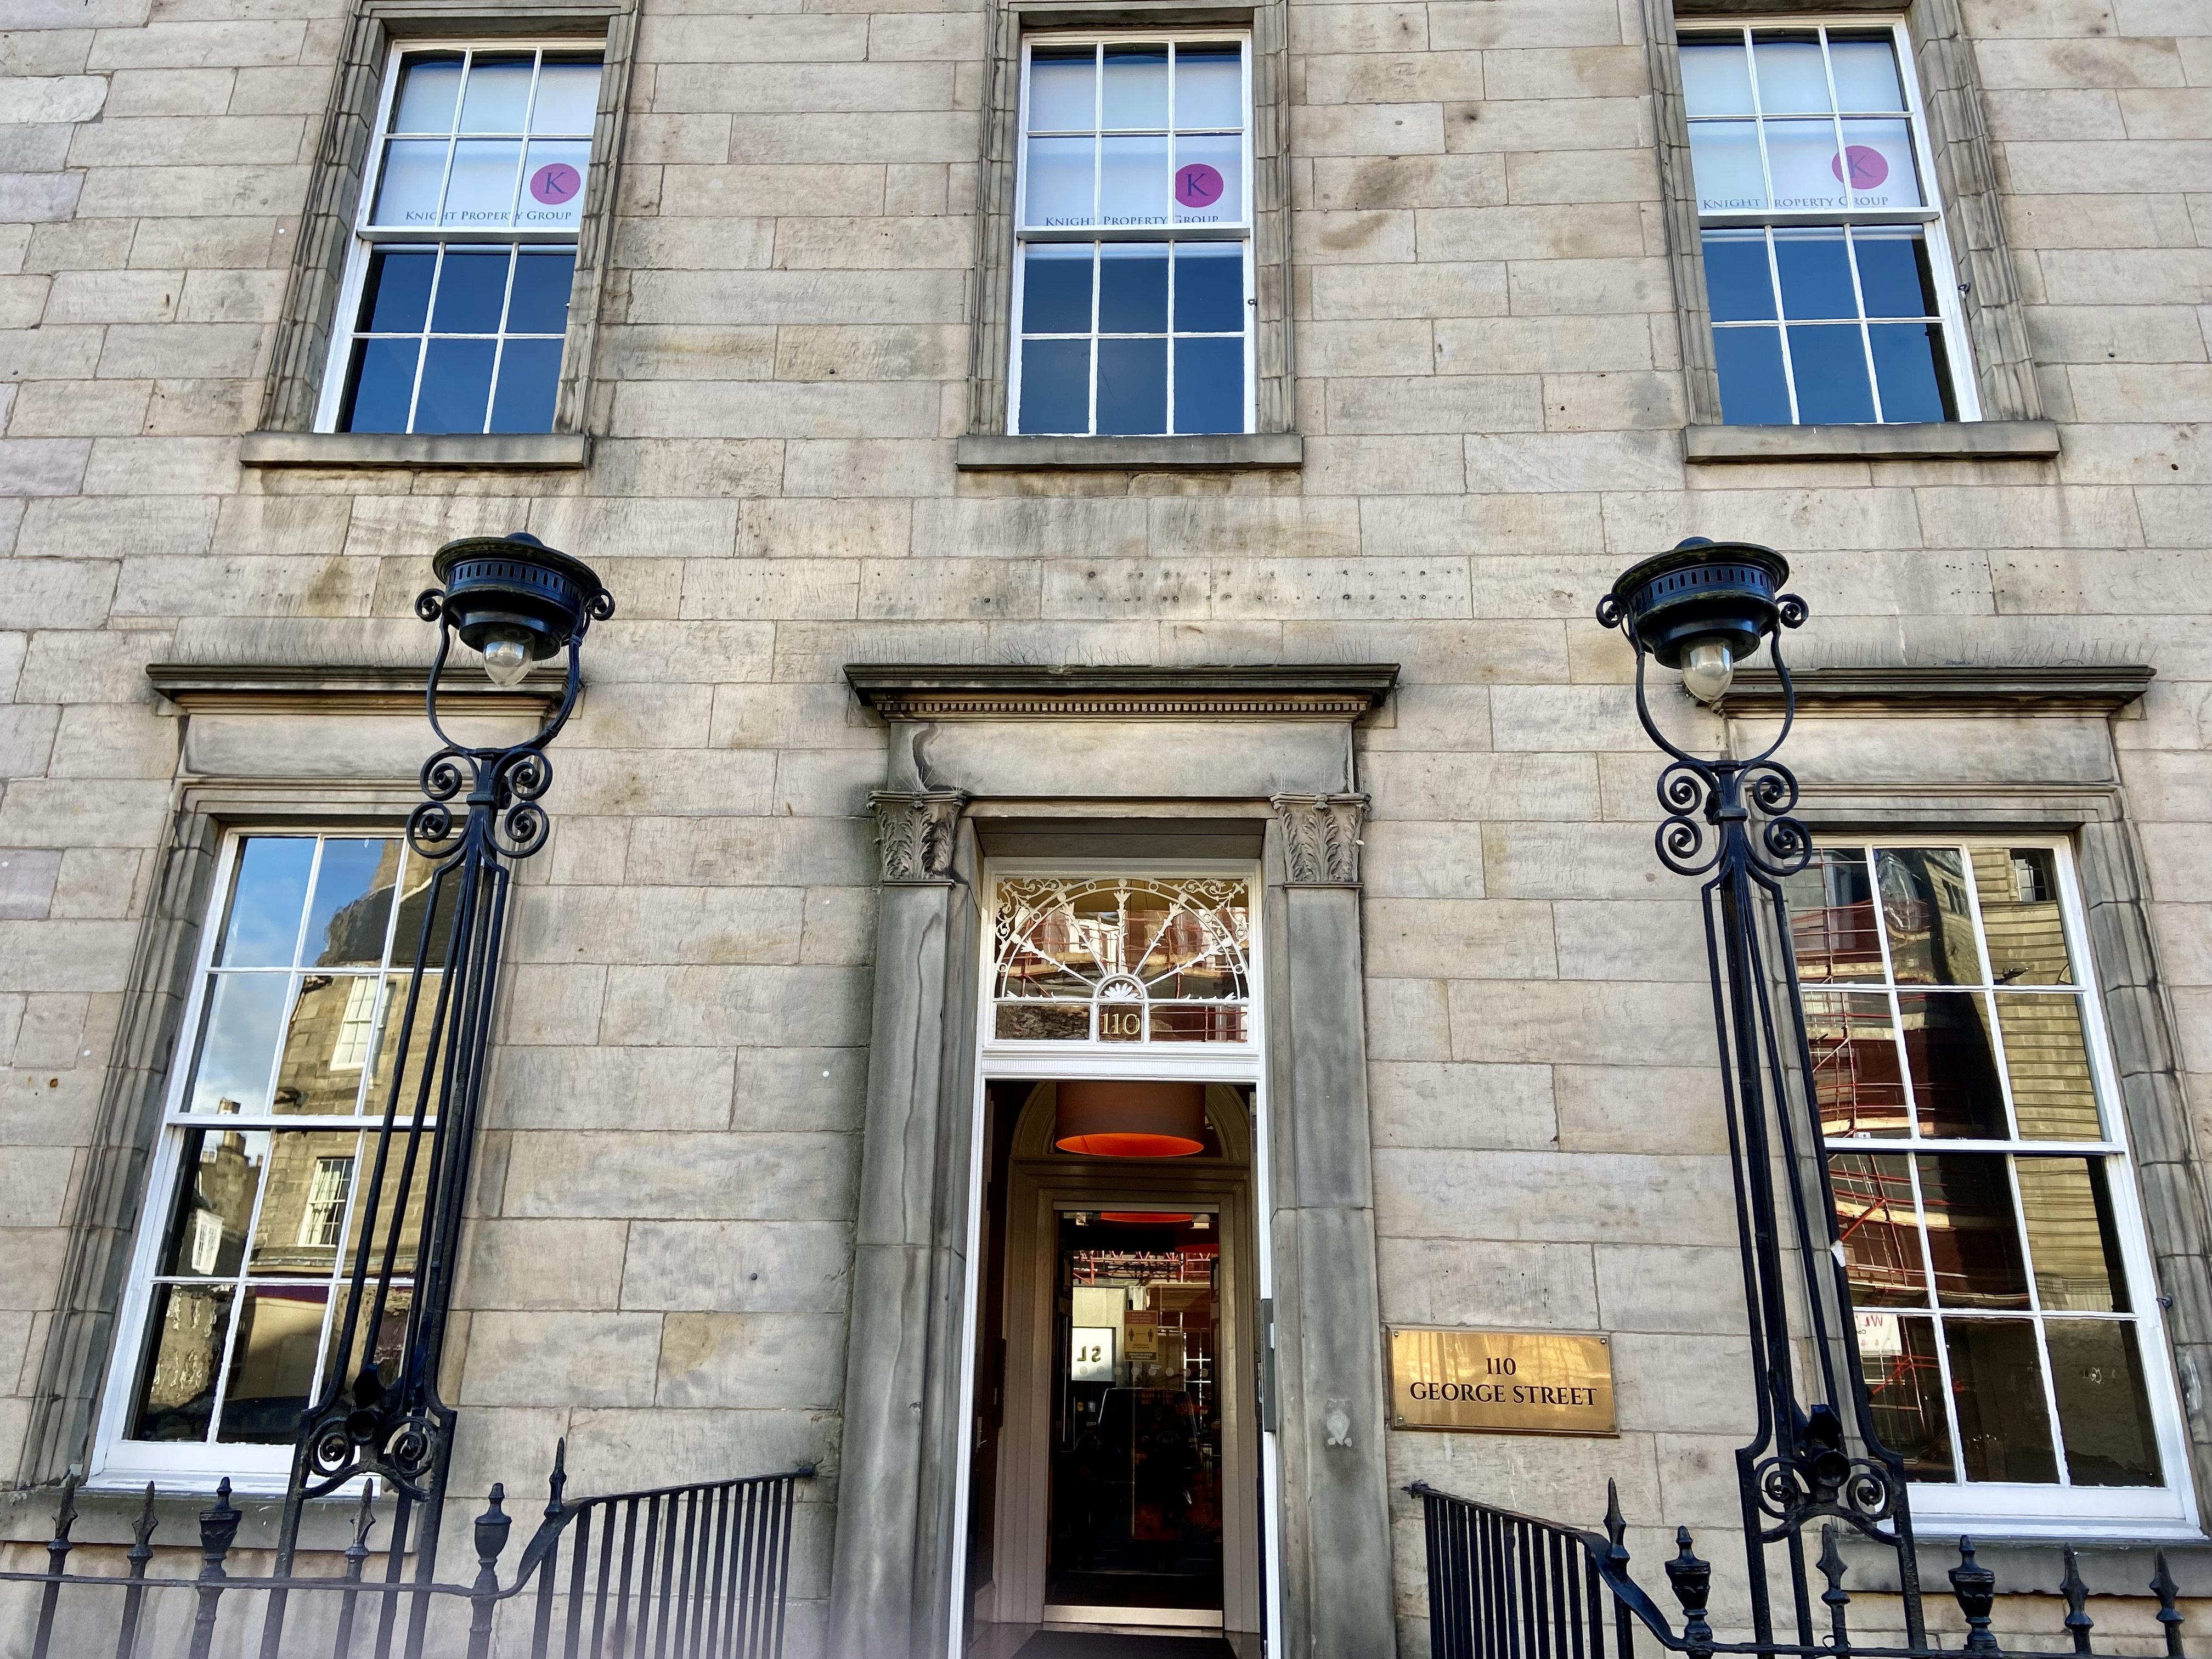 Pension and investment advisory firm Isio moves to 110 George Street in Edinburgh